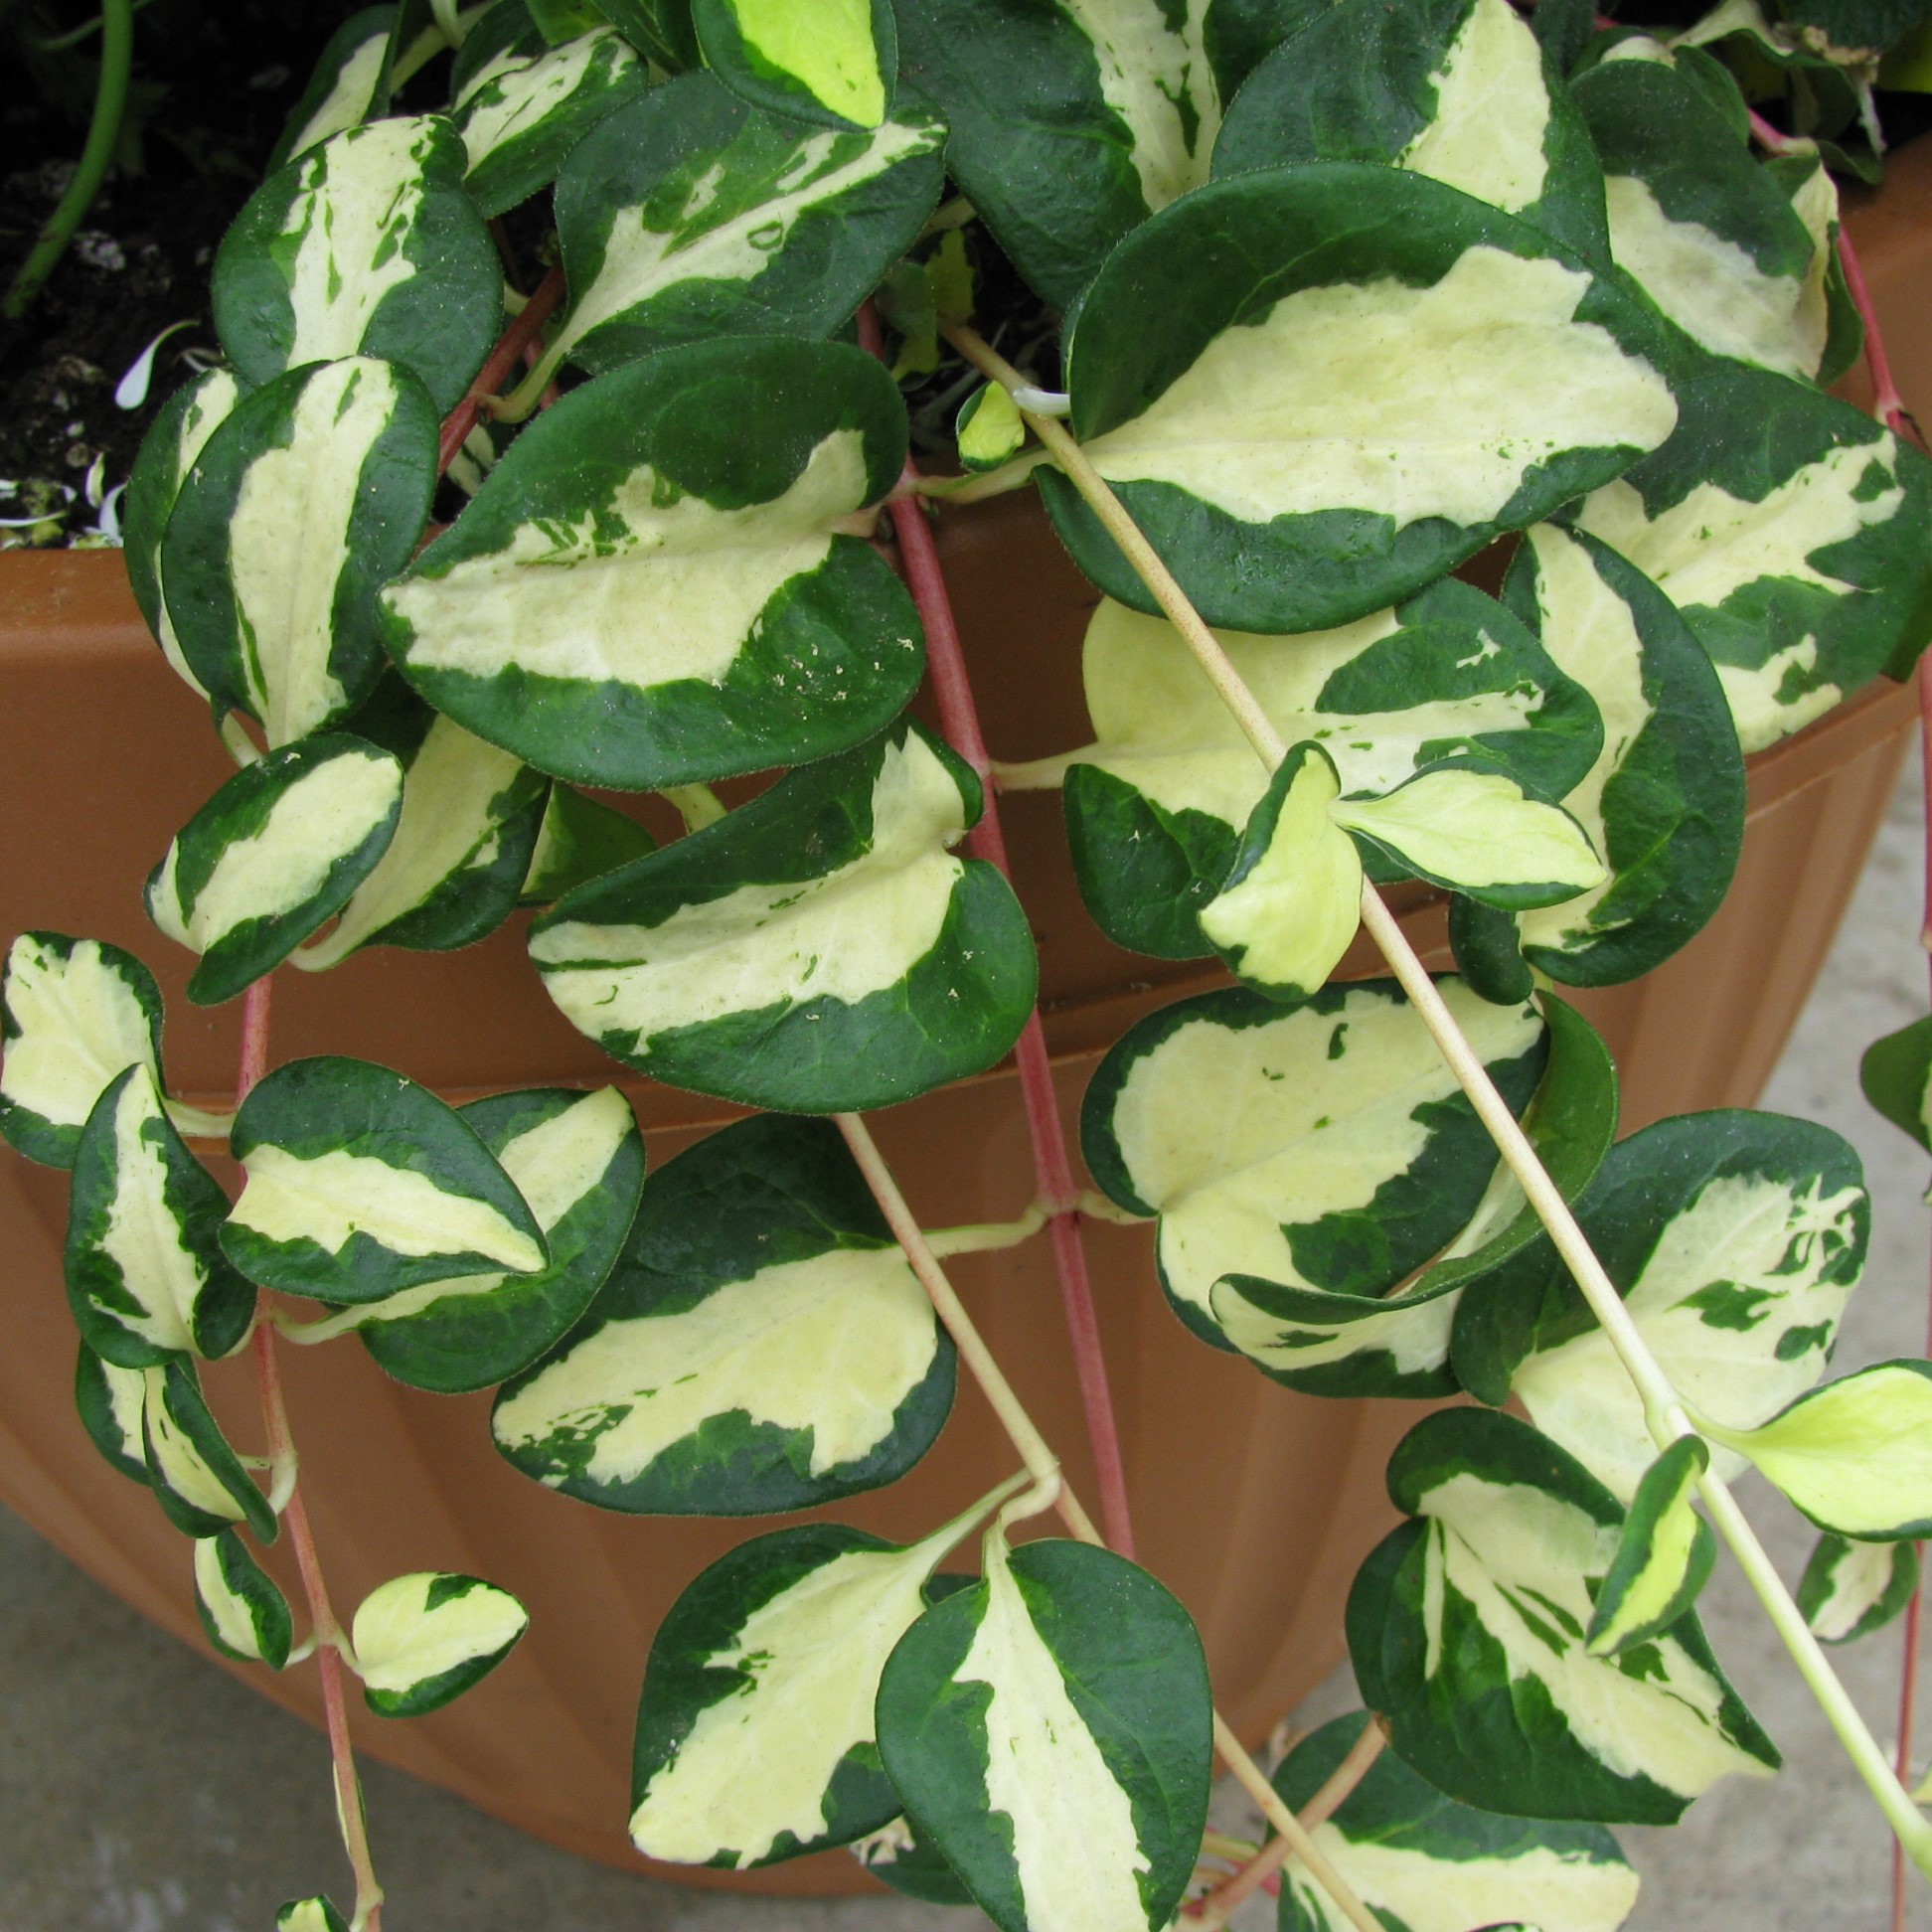 Lush Wojo's Jem Vinca Vine with its vibrant green and white variegated leaves